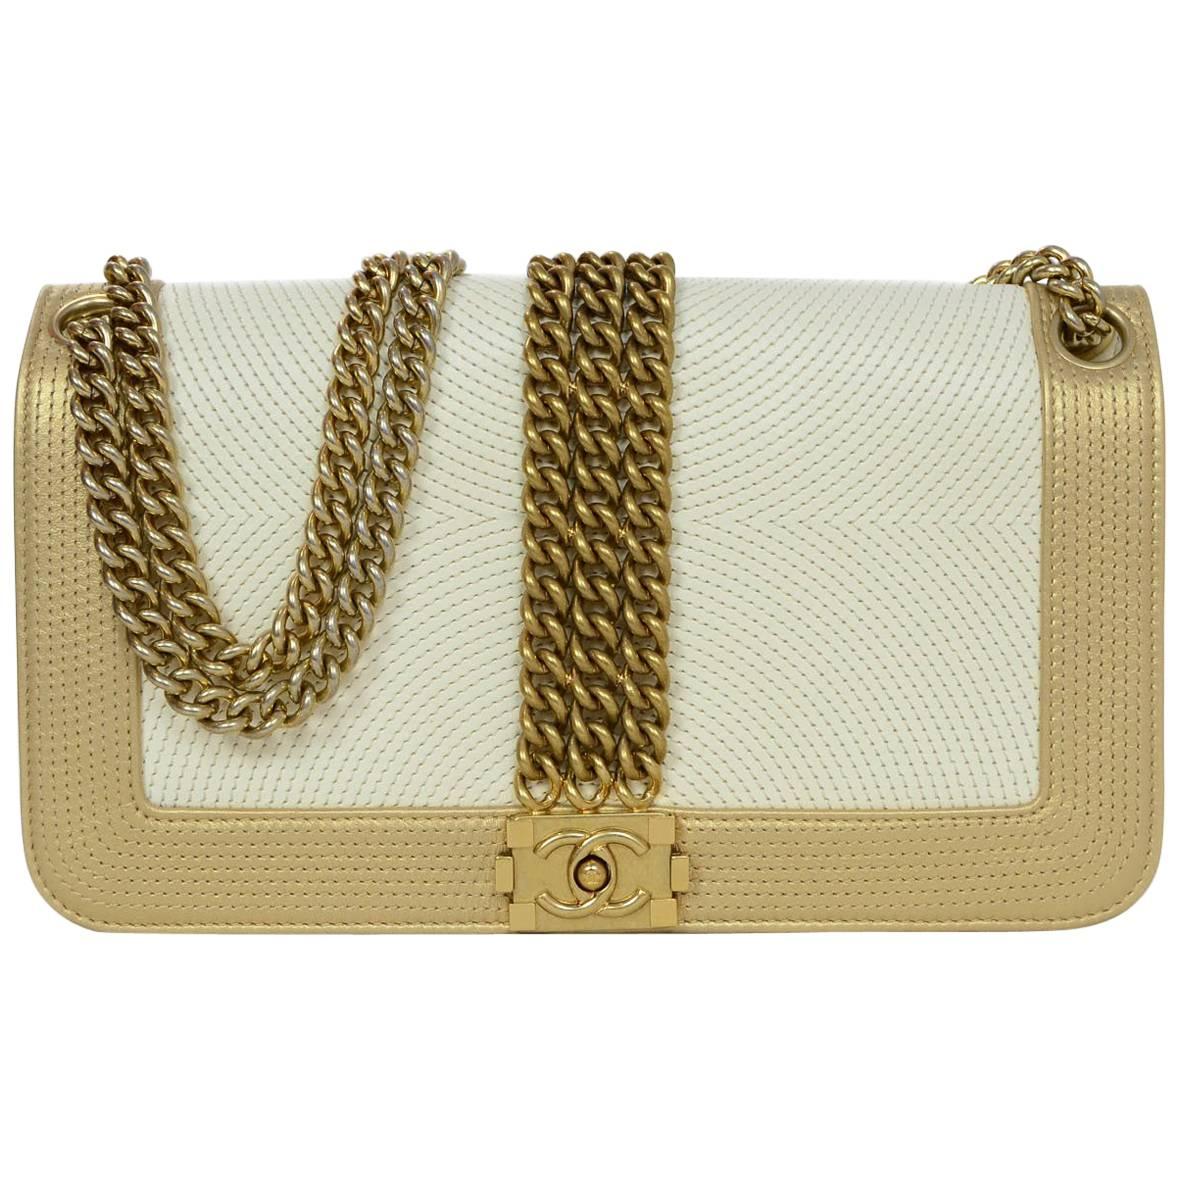 Chanel Cream and Gold Quilted Leather Rock Boy Flap Bag, 2013 